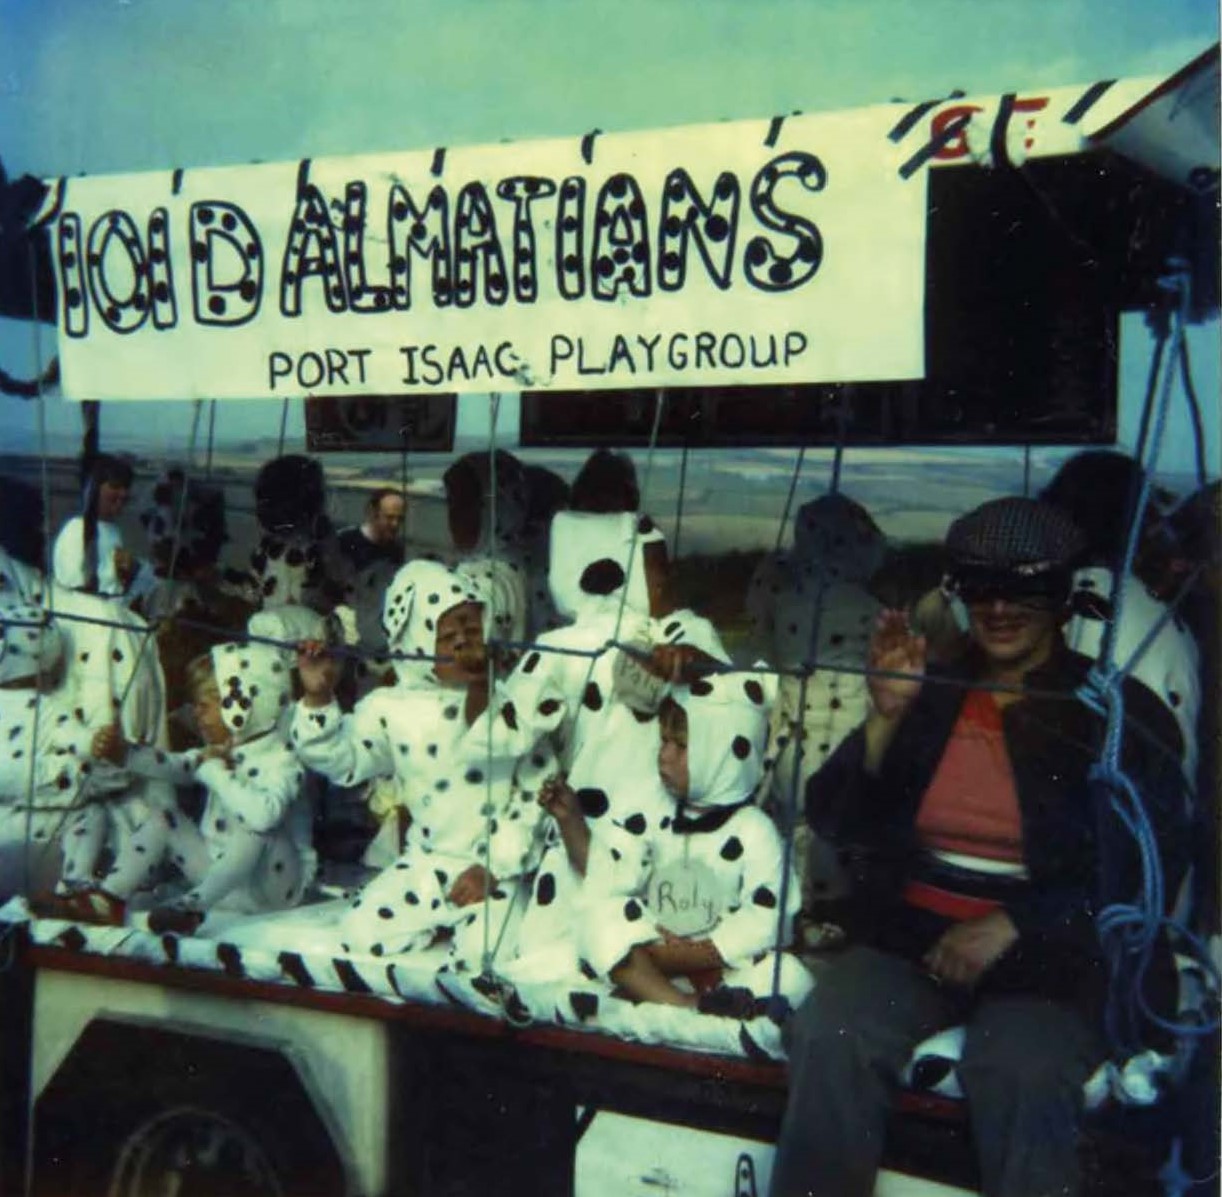 1981/82 Port Isaac Playgroup's Carnival Entry